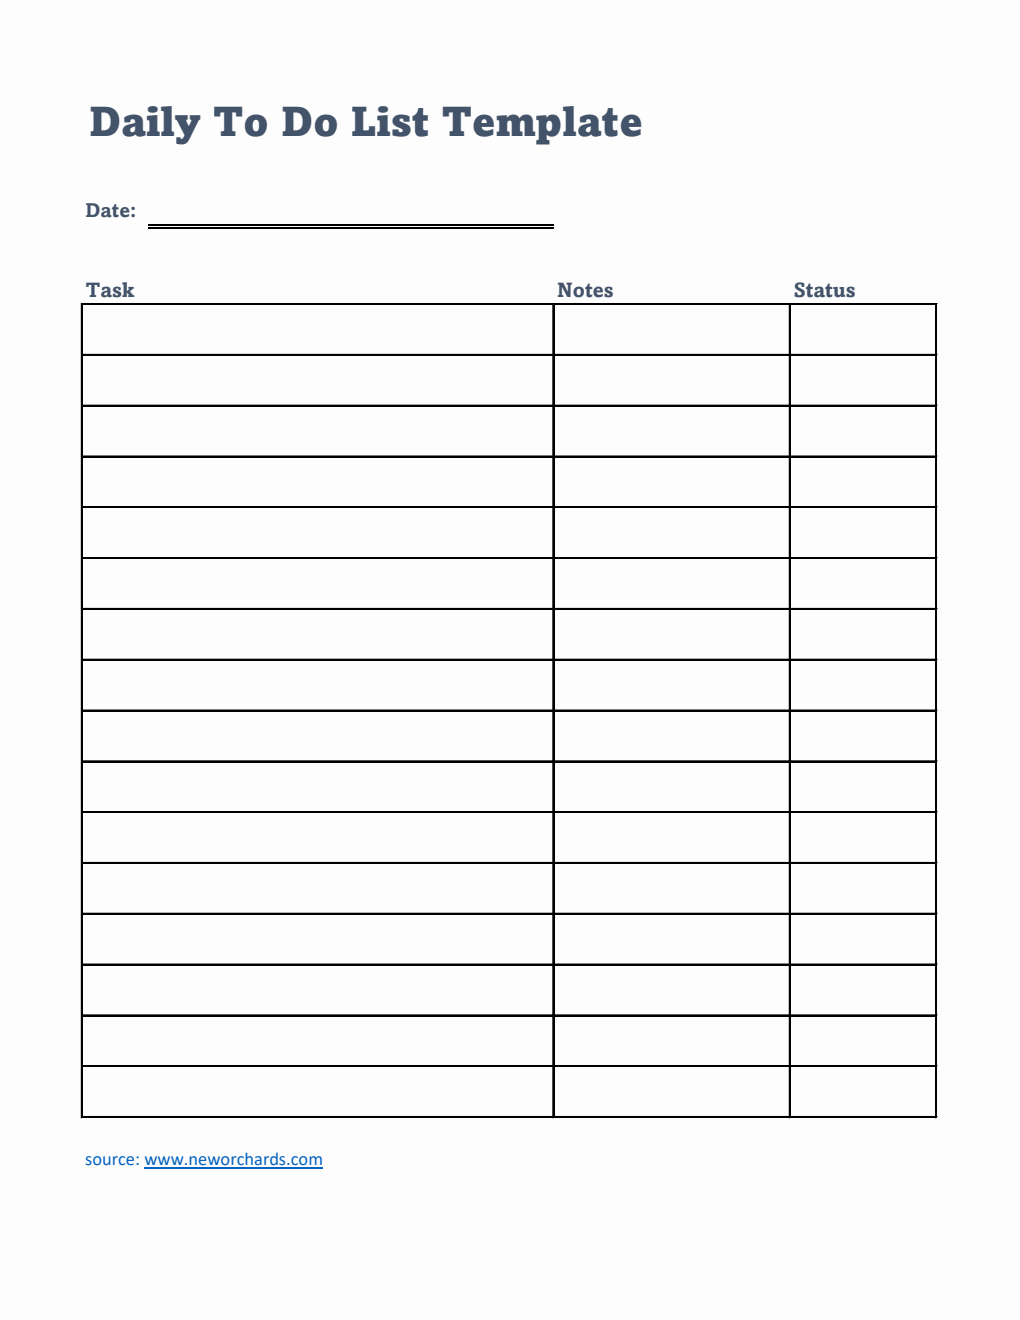 To Do List Template Excel (Simple)